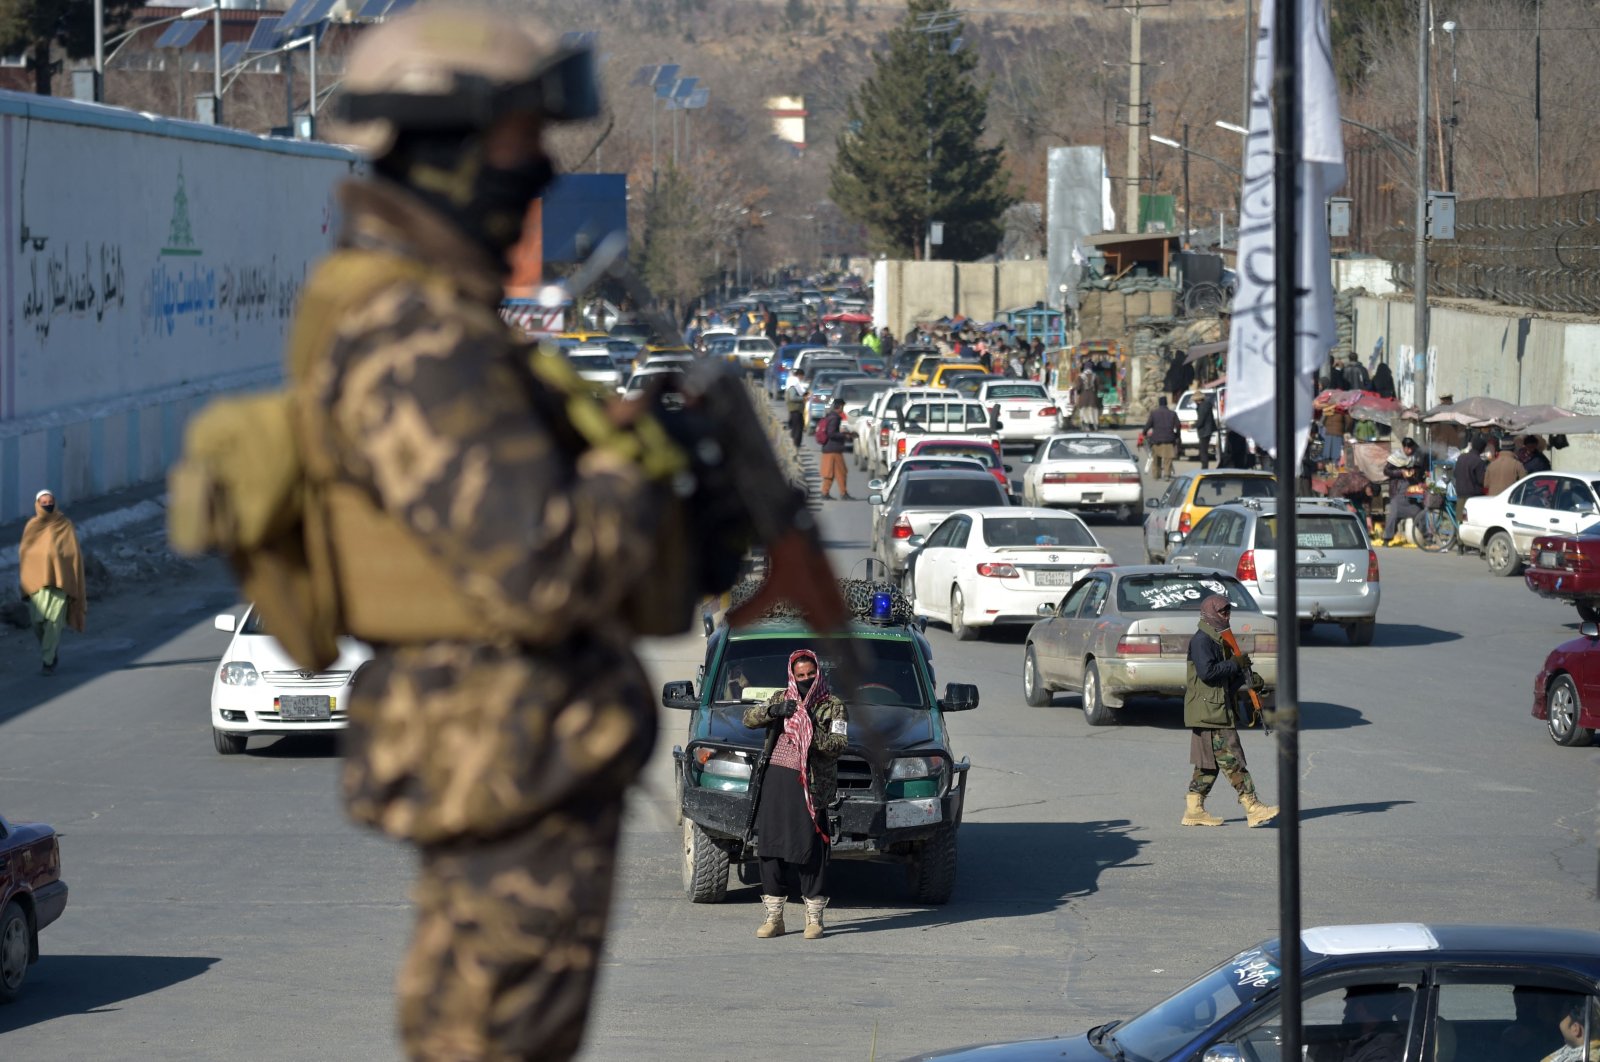 Taliban fighters stand guard before a protest in support of the Taliban regime at the Ahmad Shah Massoud square in front of the U.S. Embassy in Kabul, Afghanistan, Jan. 26, 2022. (AFP Photo)